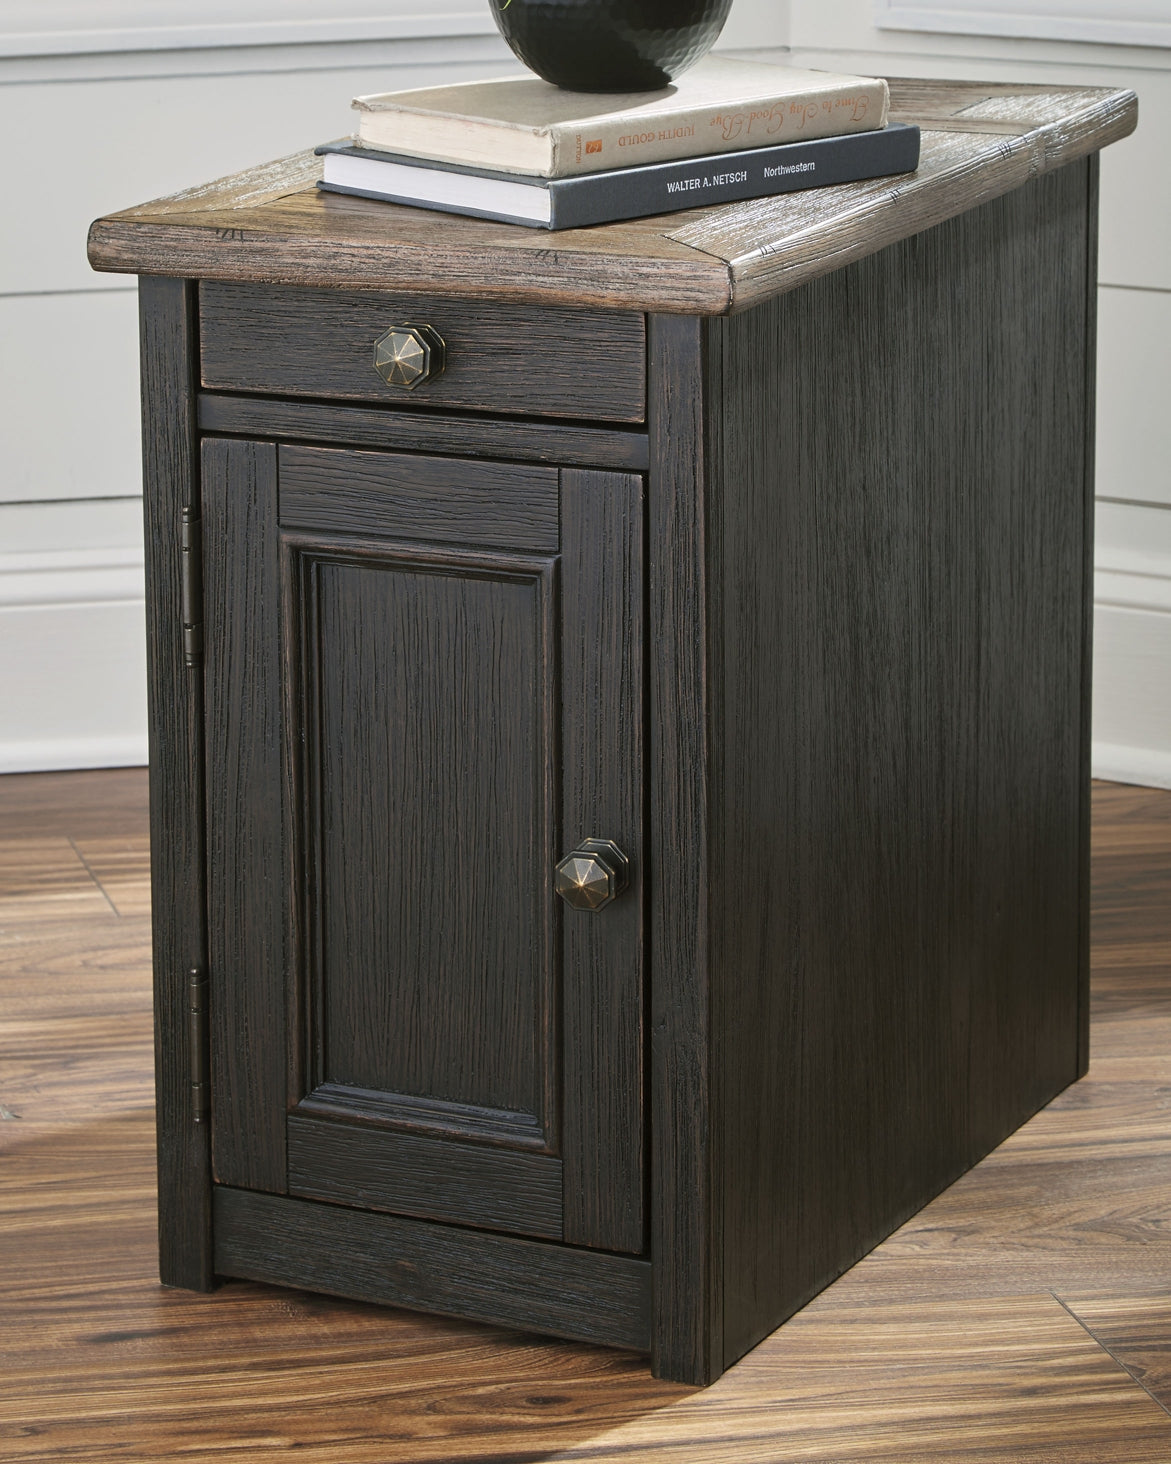 Tyler Creek 2 End Tables at Cloud 9 Mattress & Furniture furniture, home furnishing, home decor